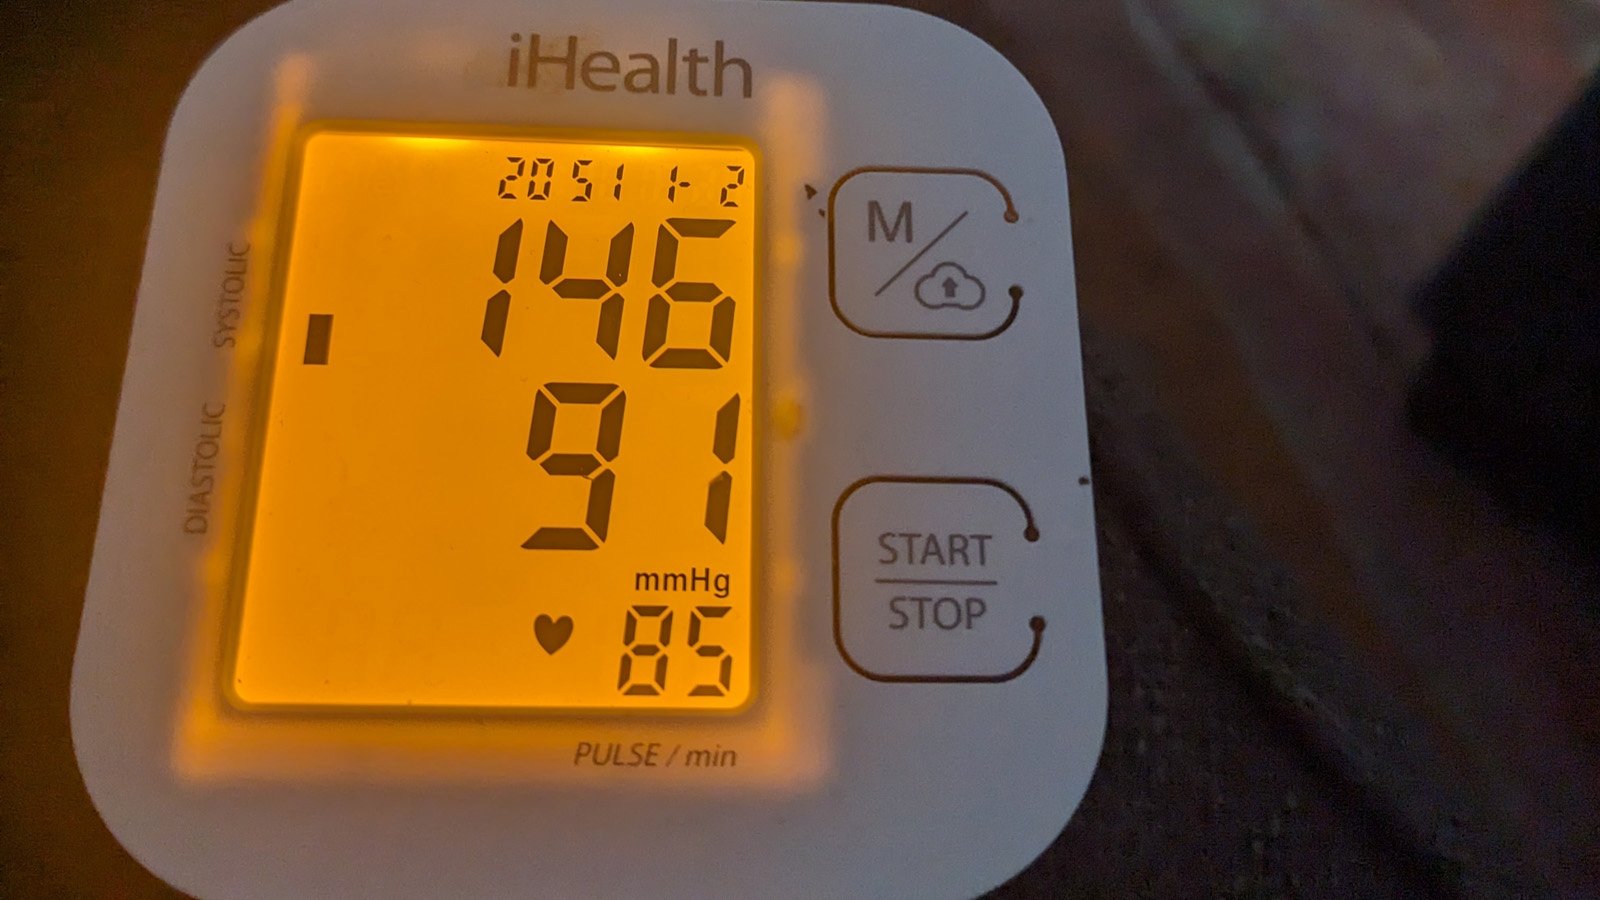 Digital readout of blood pressure display showing 146 over 91